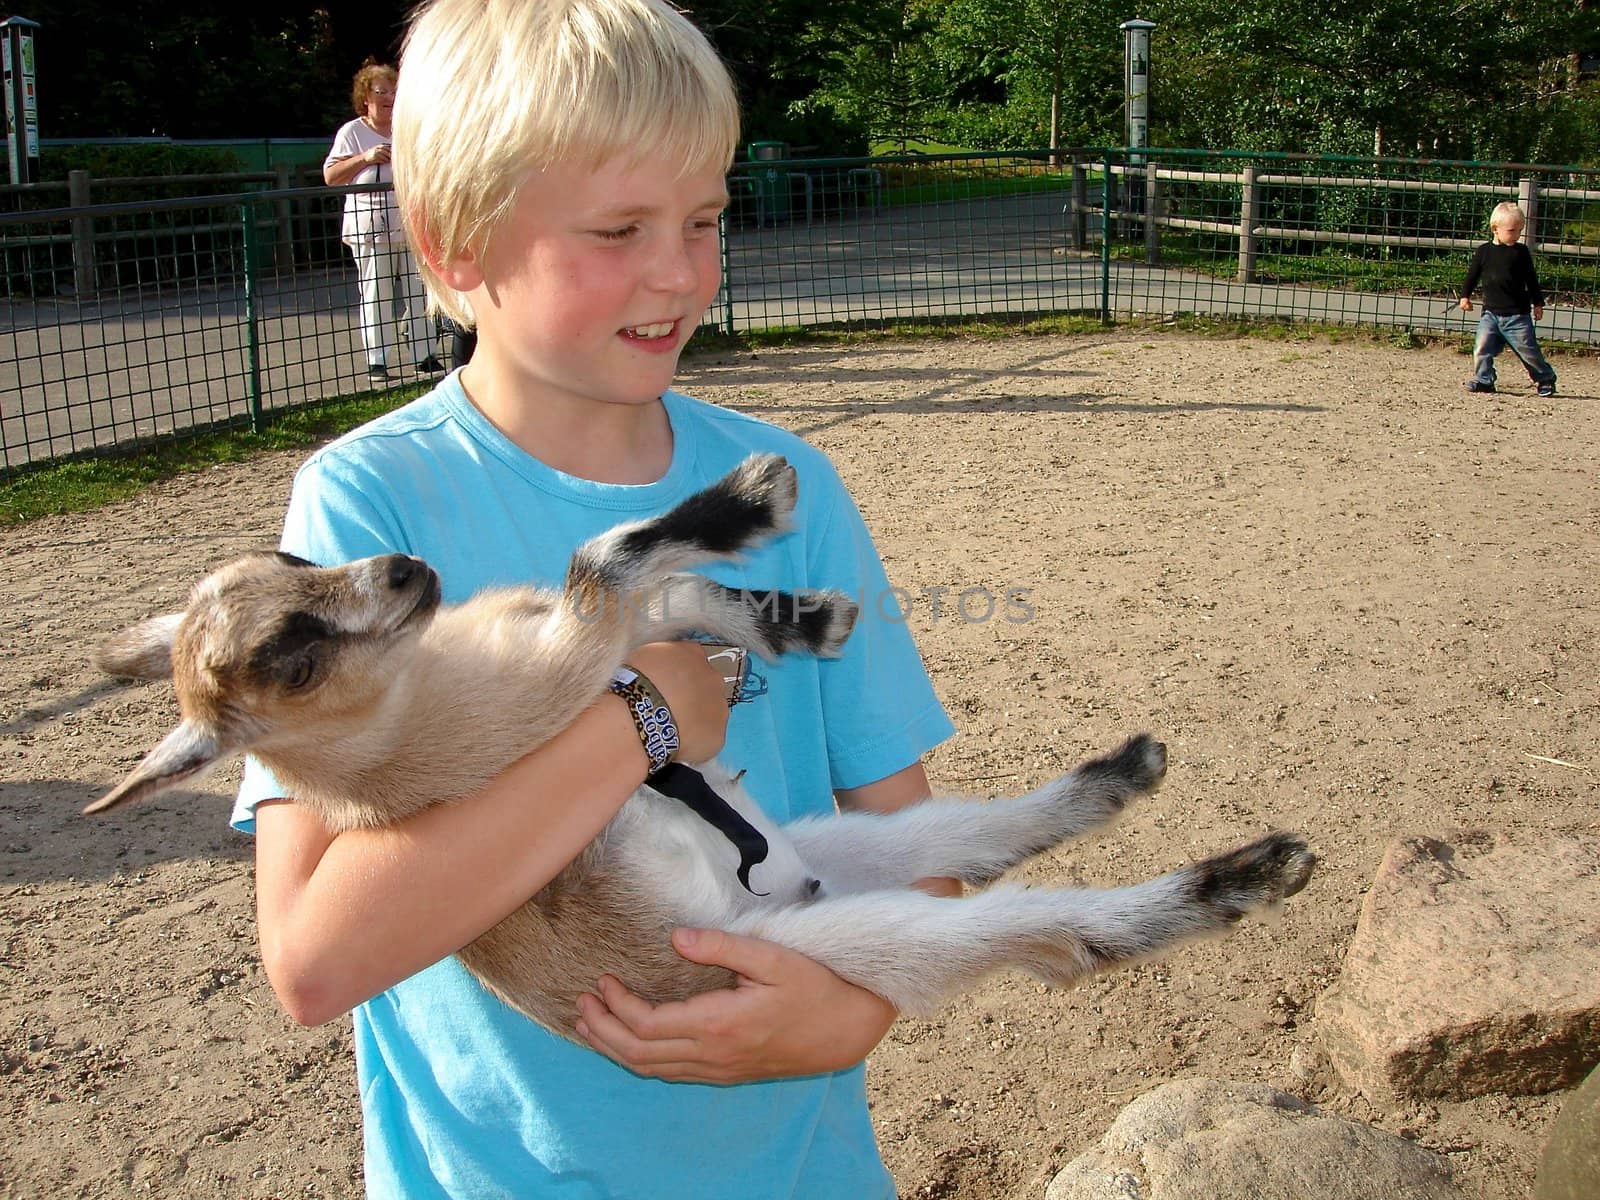 boy holding a goat. Please note: No negative use allowed.